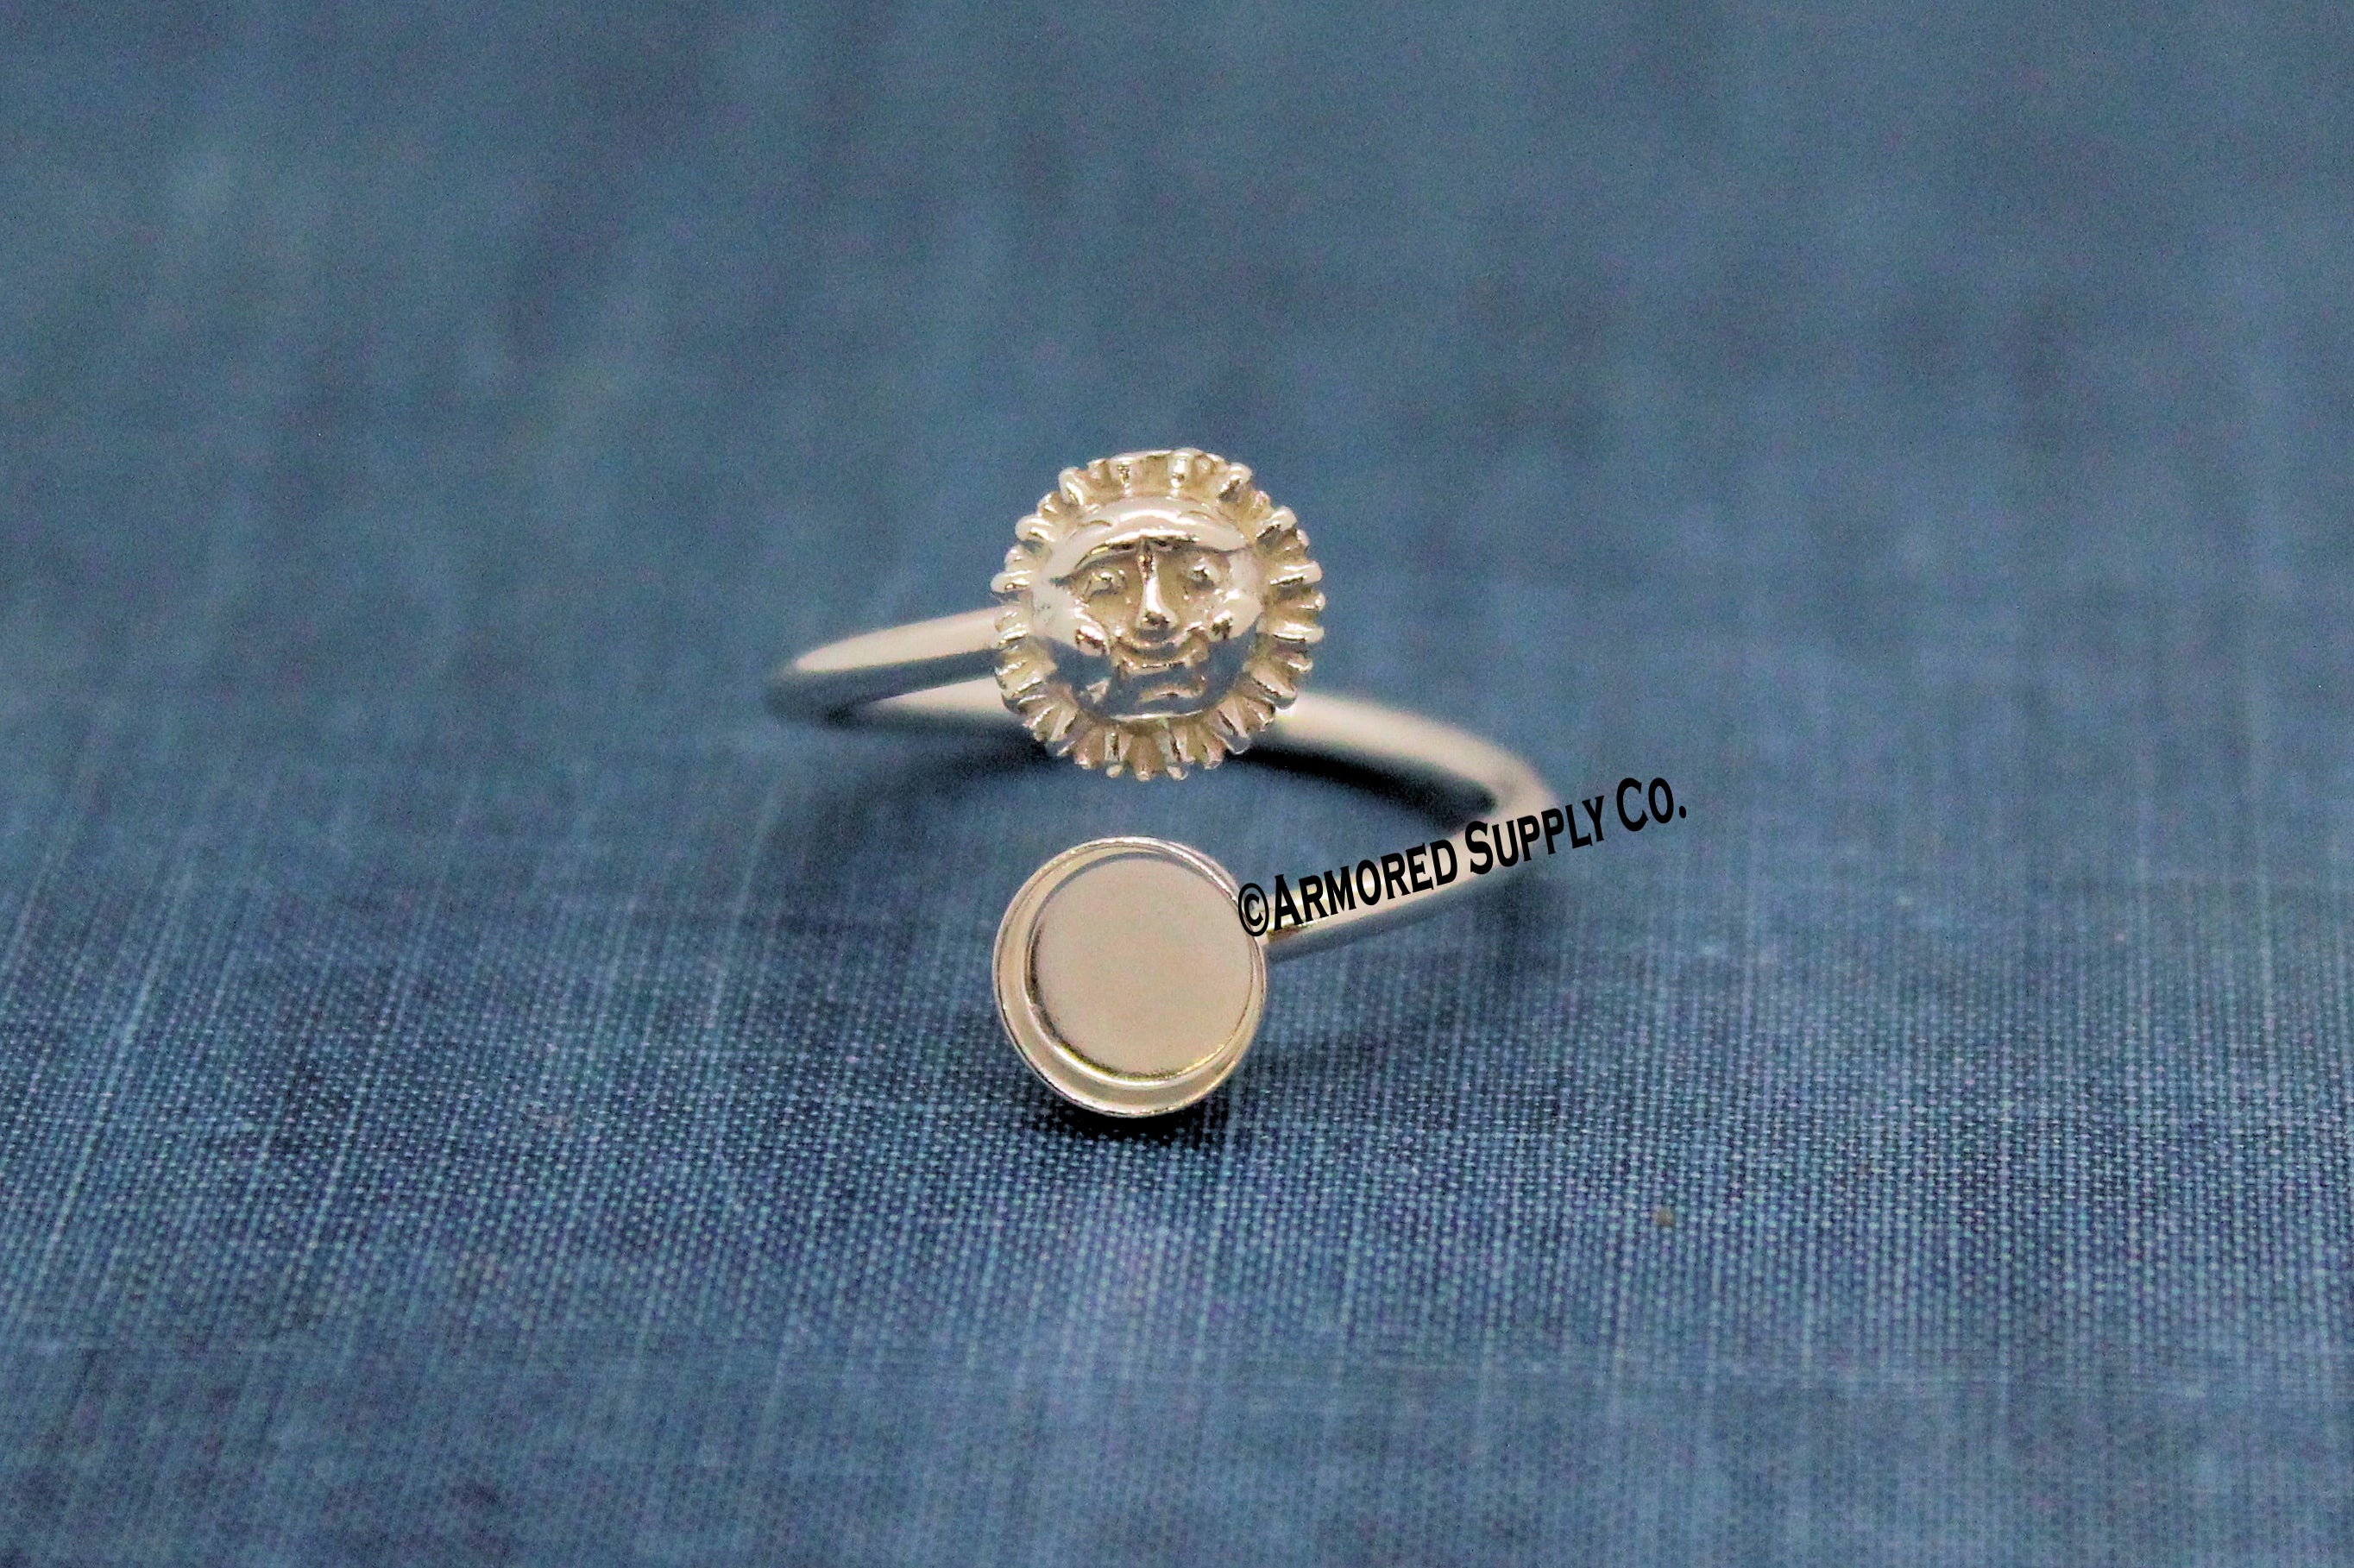 4mm Bezel Sterling Silver Smiling Sun Wrap Bypass Adjustable Ring blank